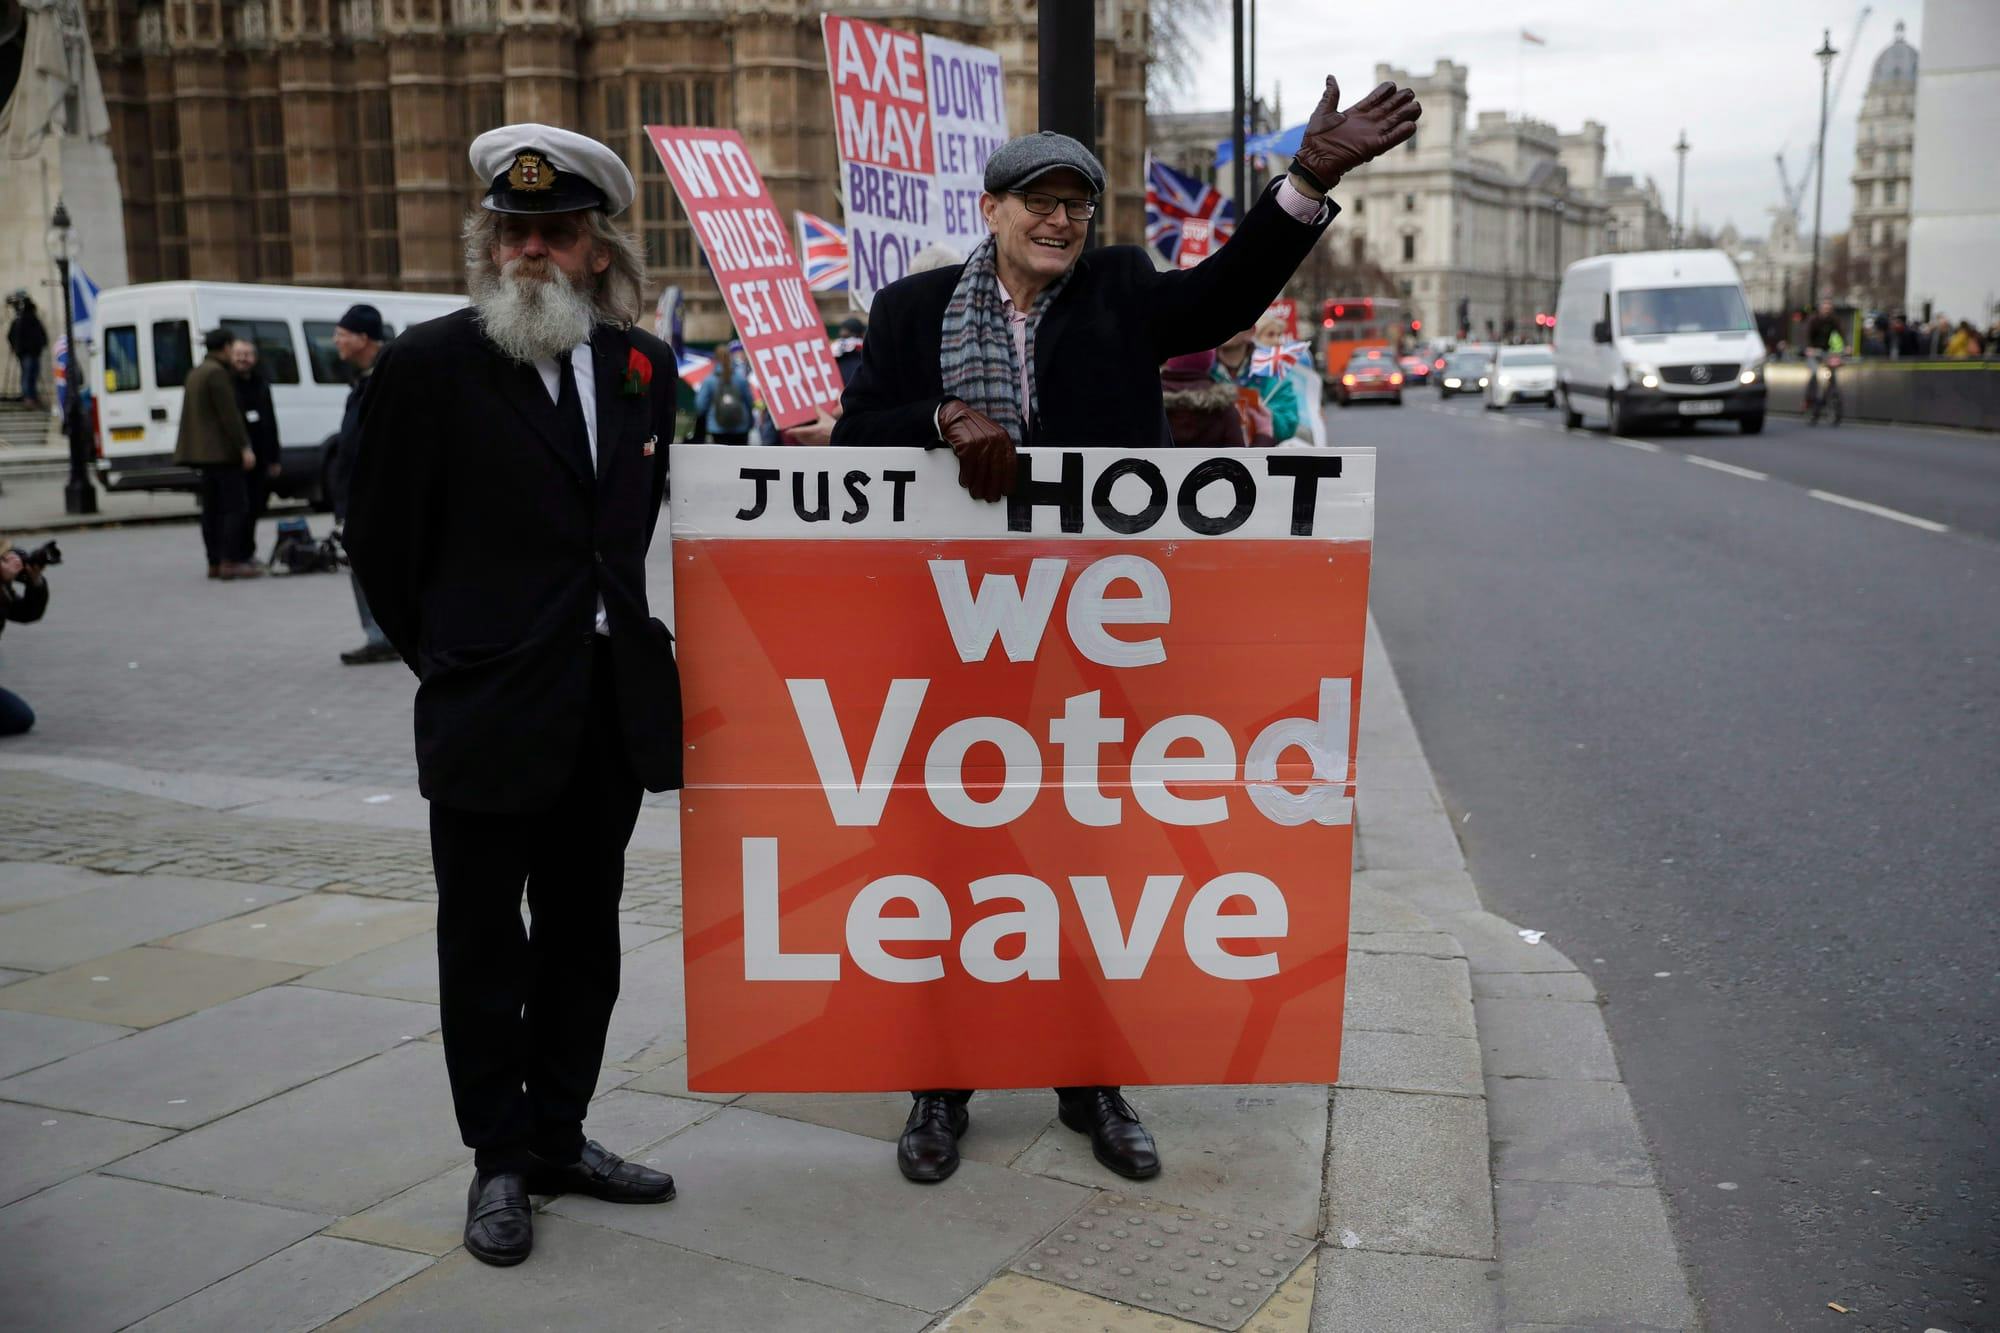 A Brexit supporter holds a sign saying "JUST HOOT: we Voted Leave" at a protest in London, U.K.